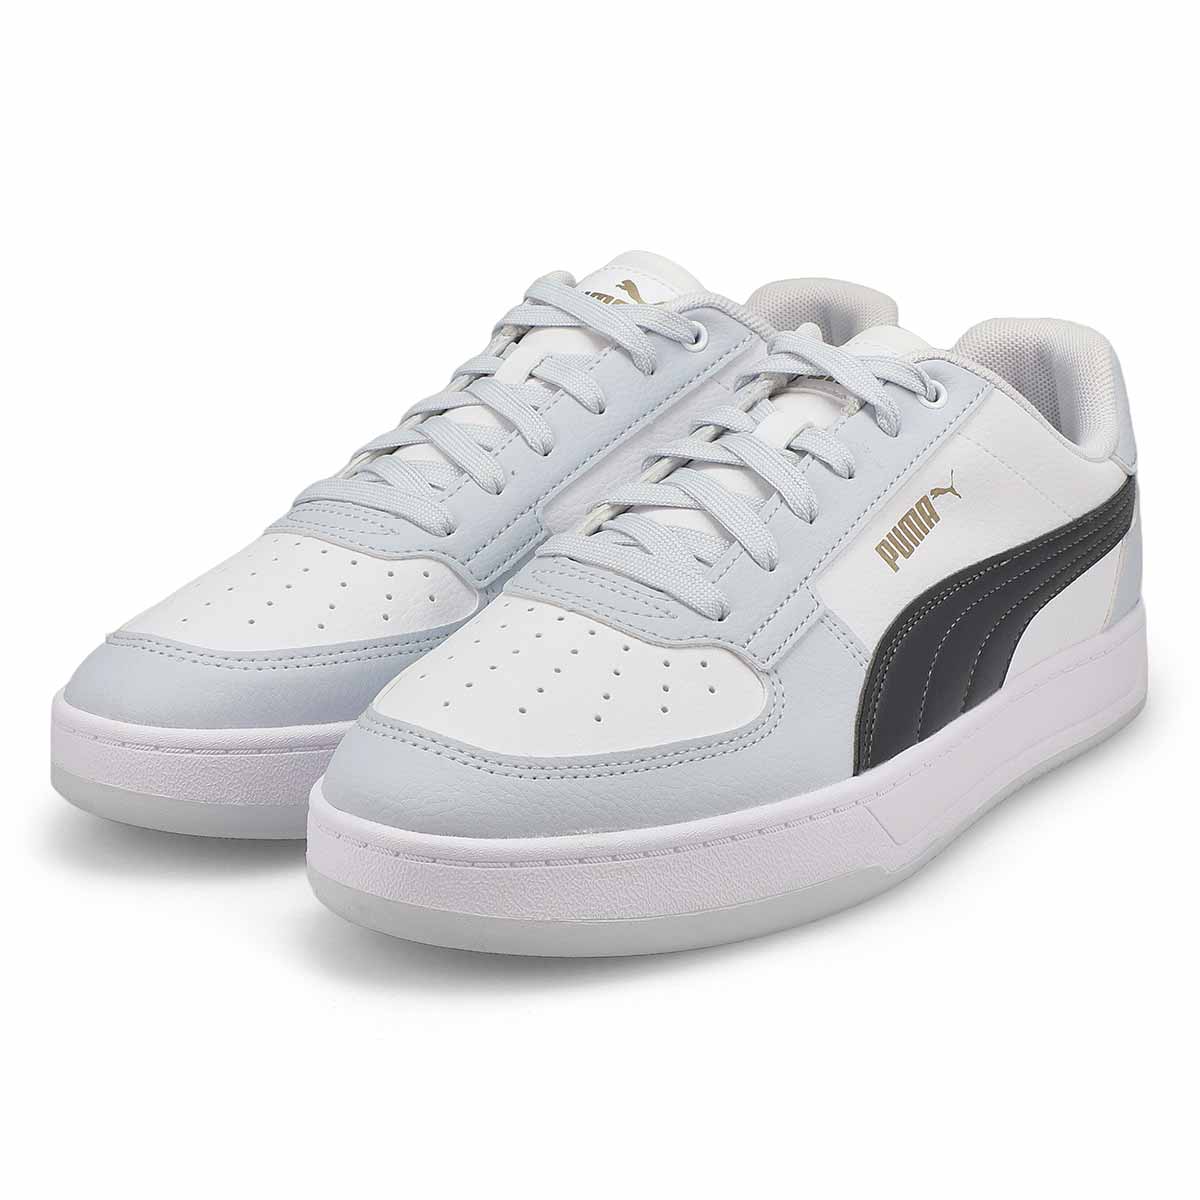 Men's Caven 2.0 Lace Up Sneaker - White/Strong Gray/Silver Mist